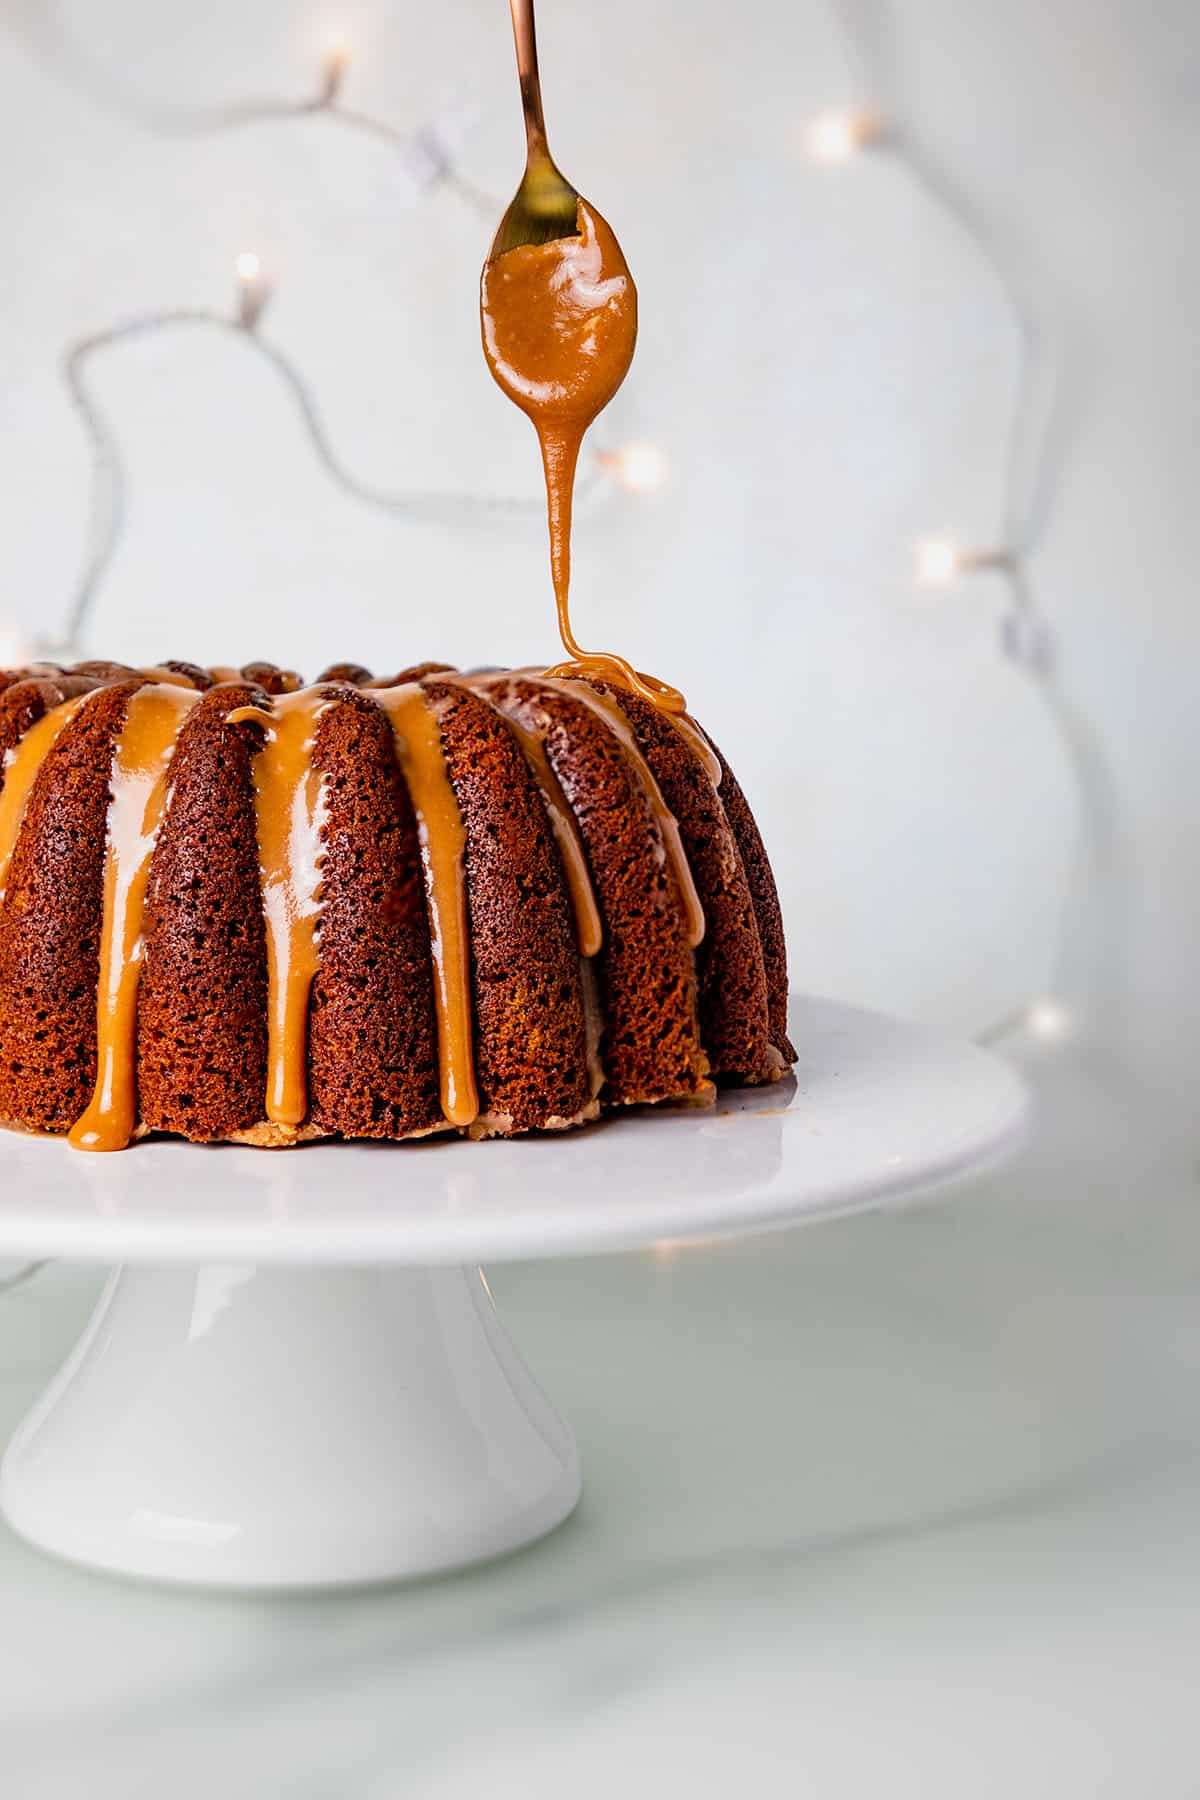 gingerbread bundt cake being decorated with caramel sauce